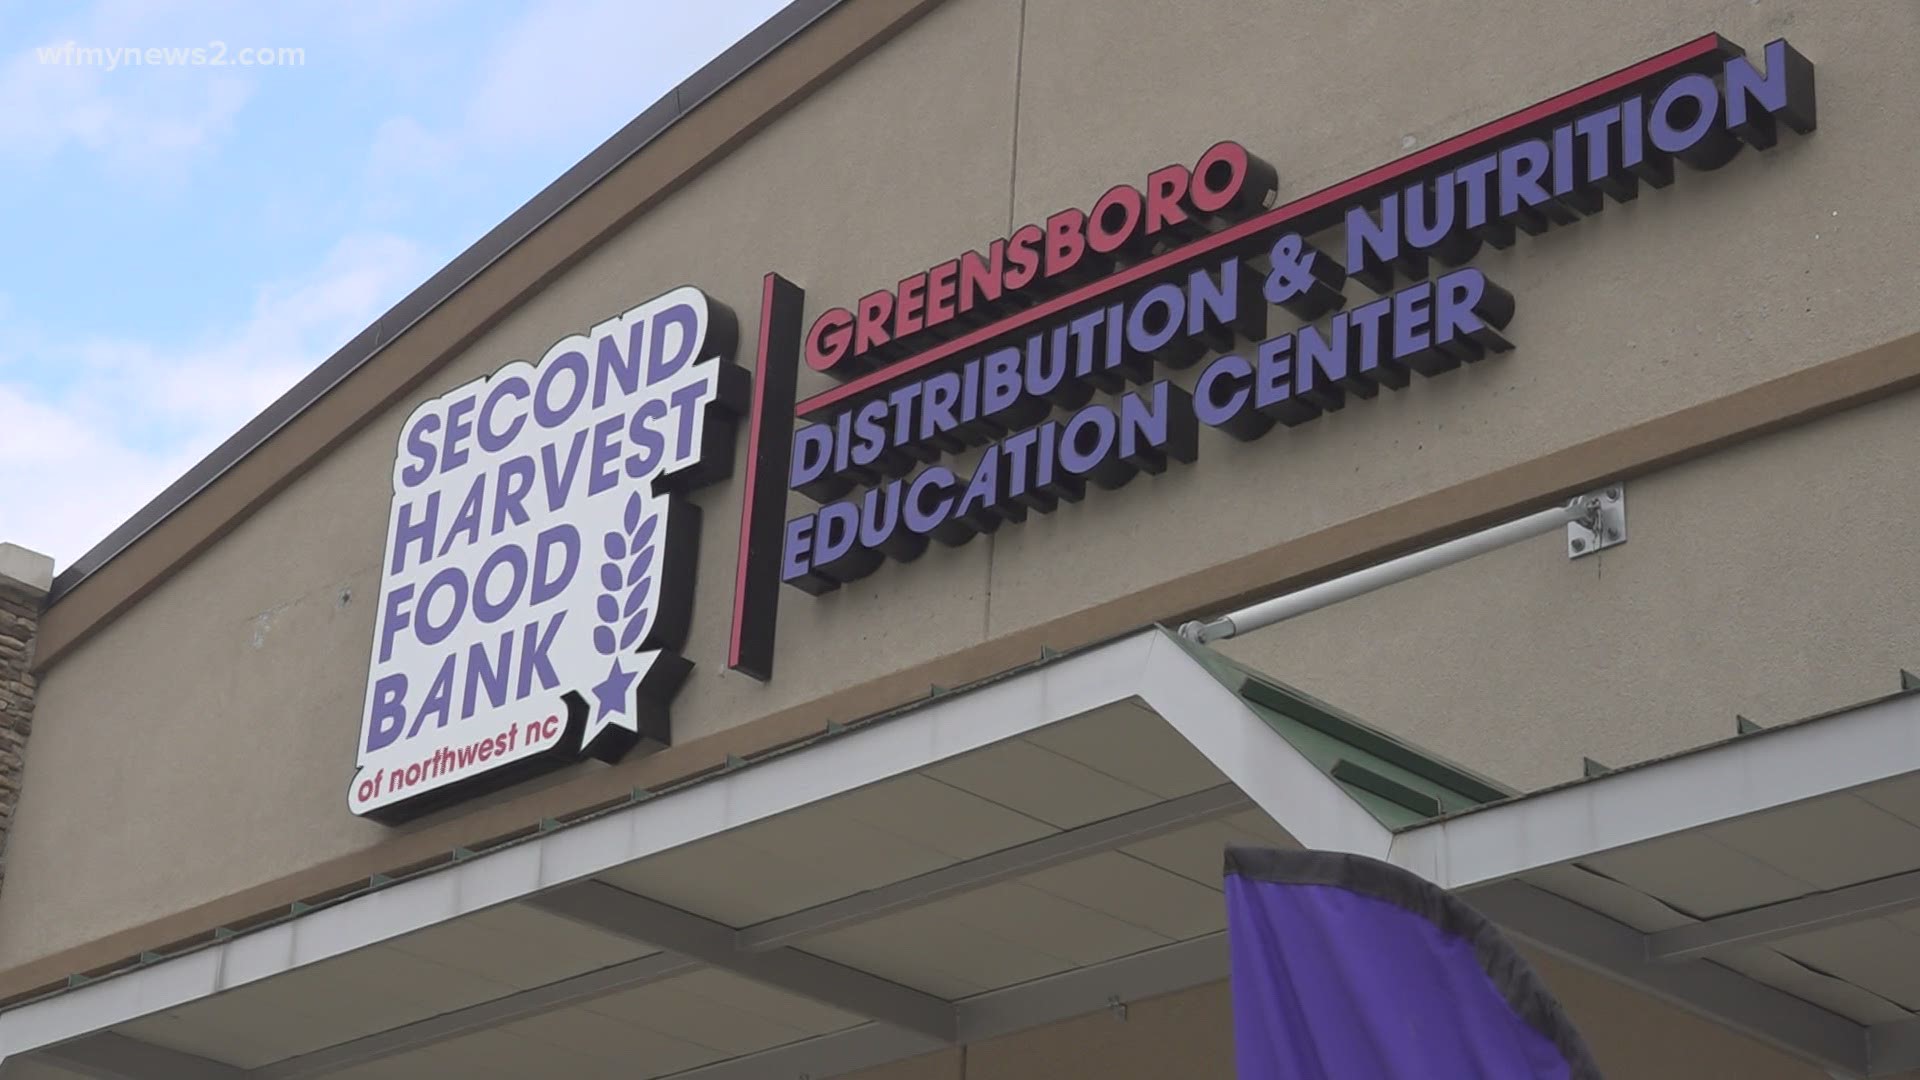 The new center opened in Greensboro and will help even more people around the Triad.